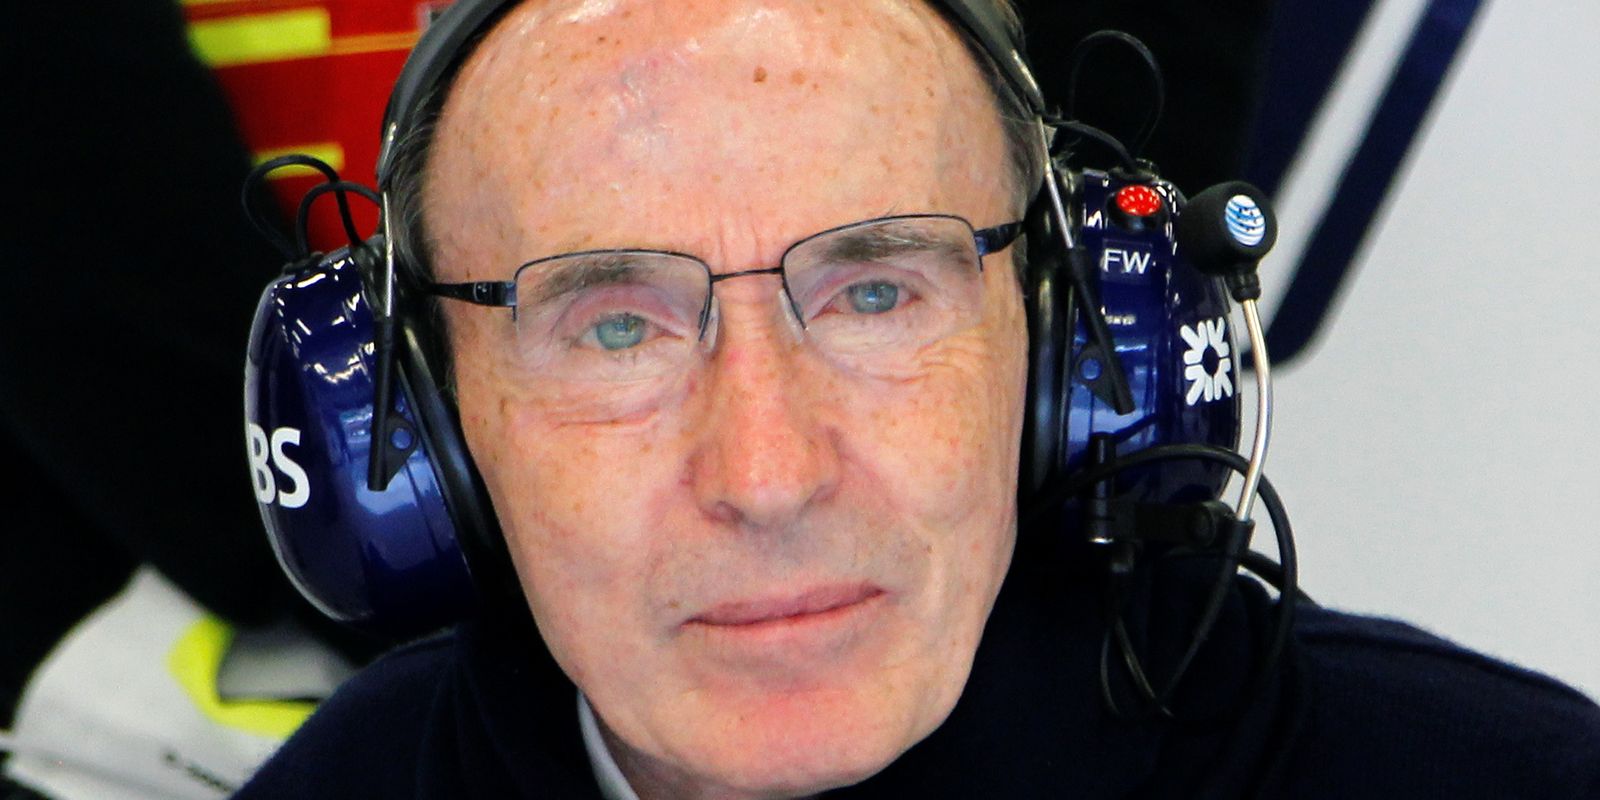 FILE PHOTO: Frank Williams, founder of the Williams Formula One team, looks on during the third free practice session of the Belgian F1 Grand Prix in Spa Francorchamps